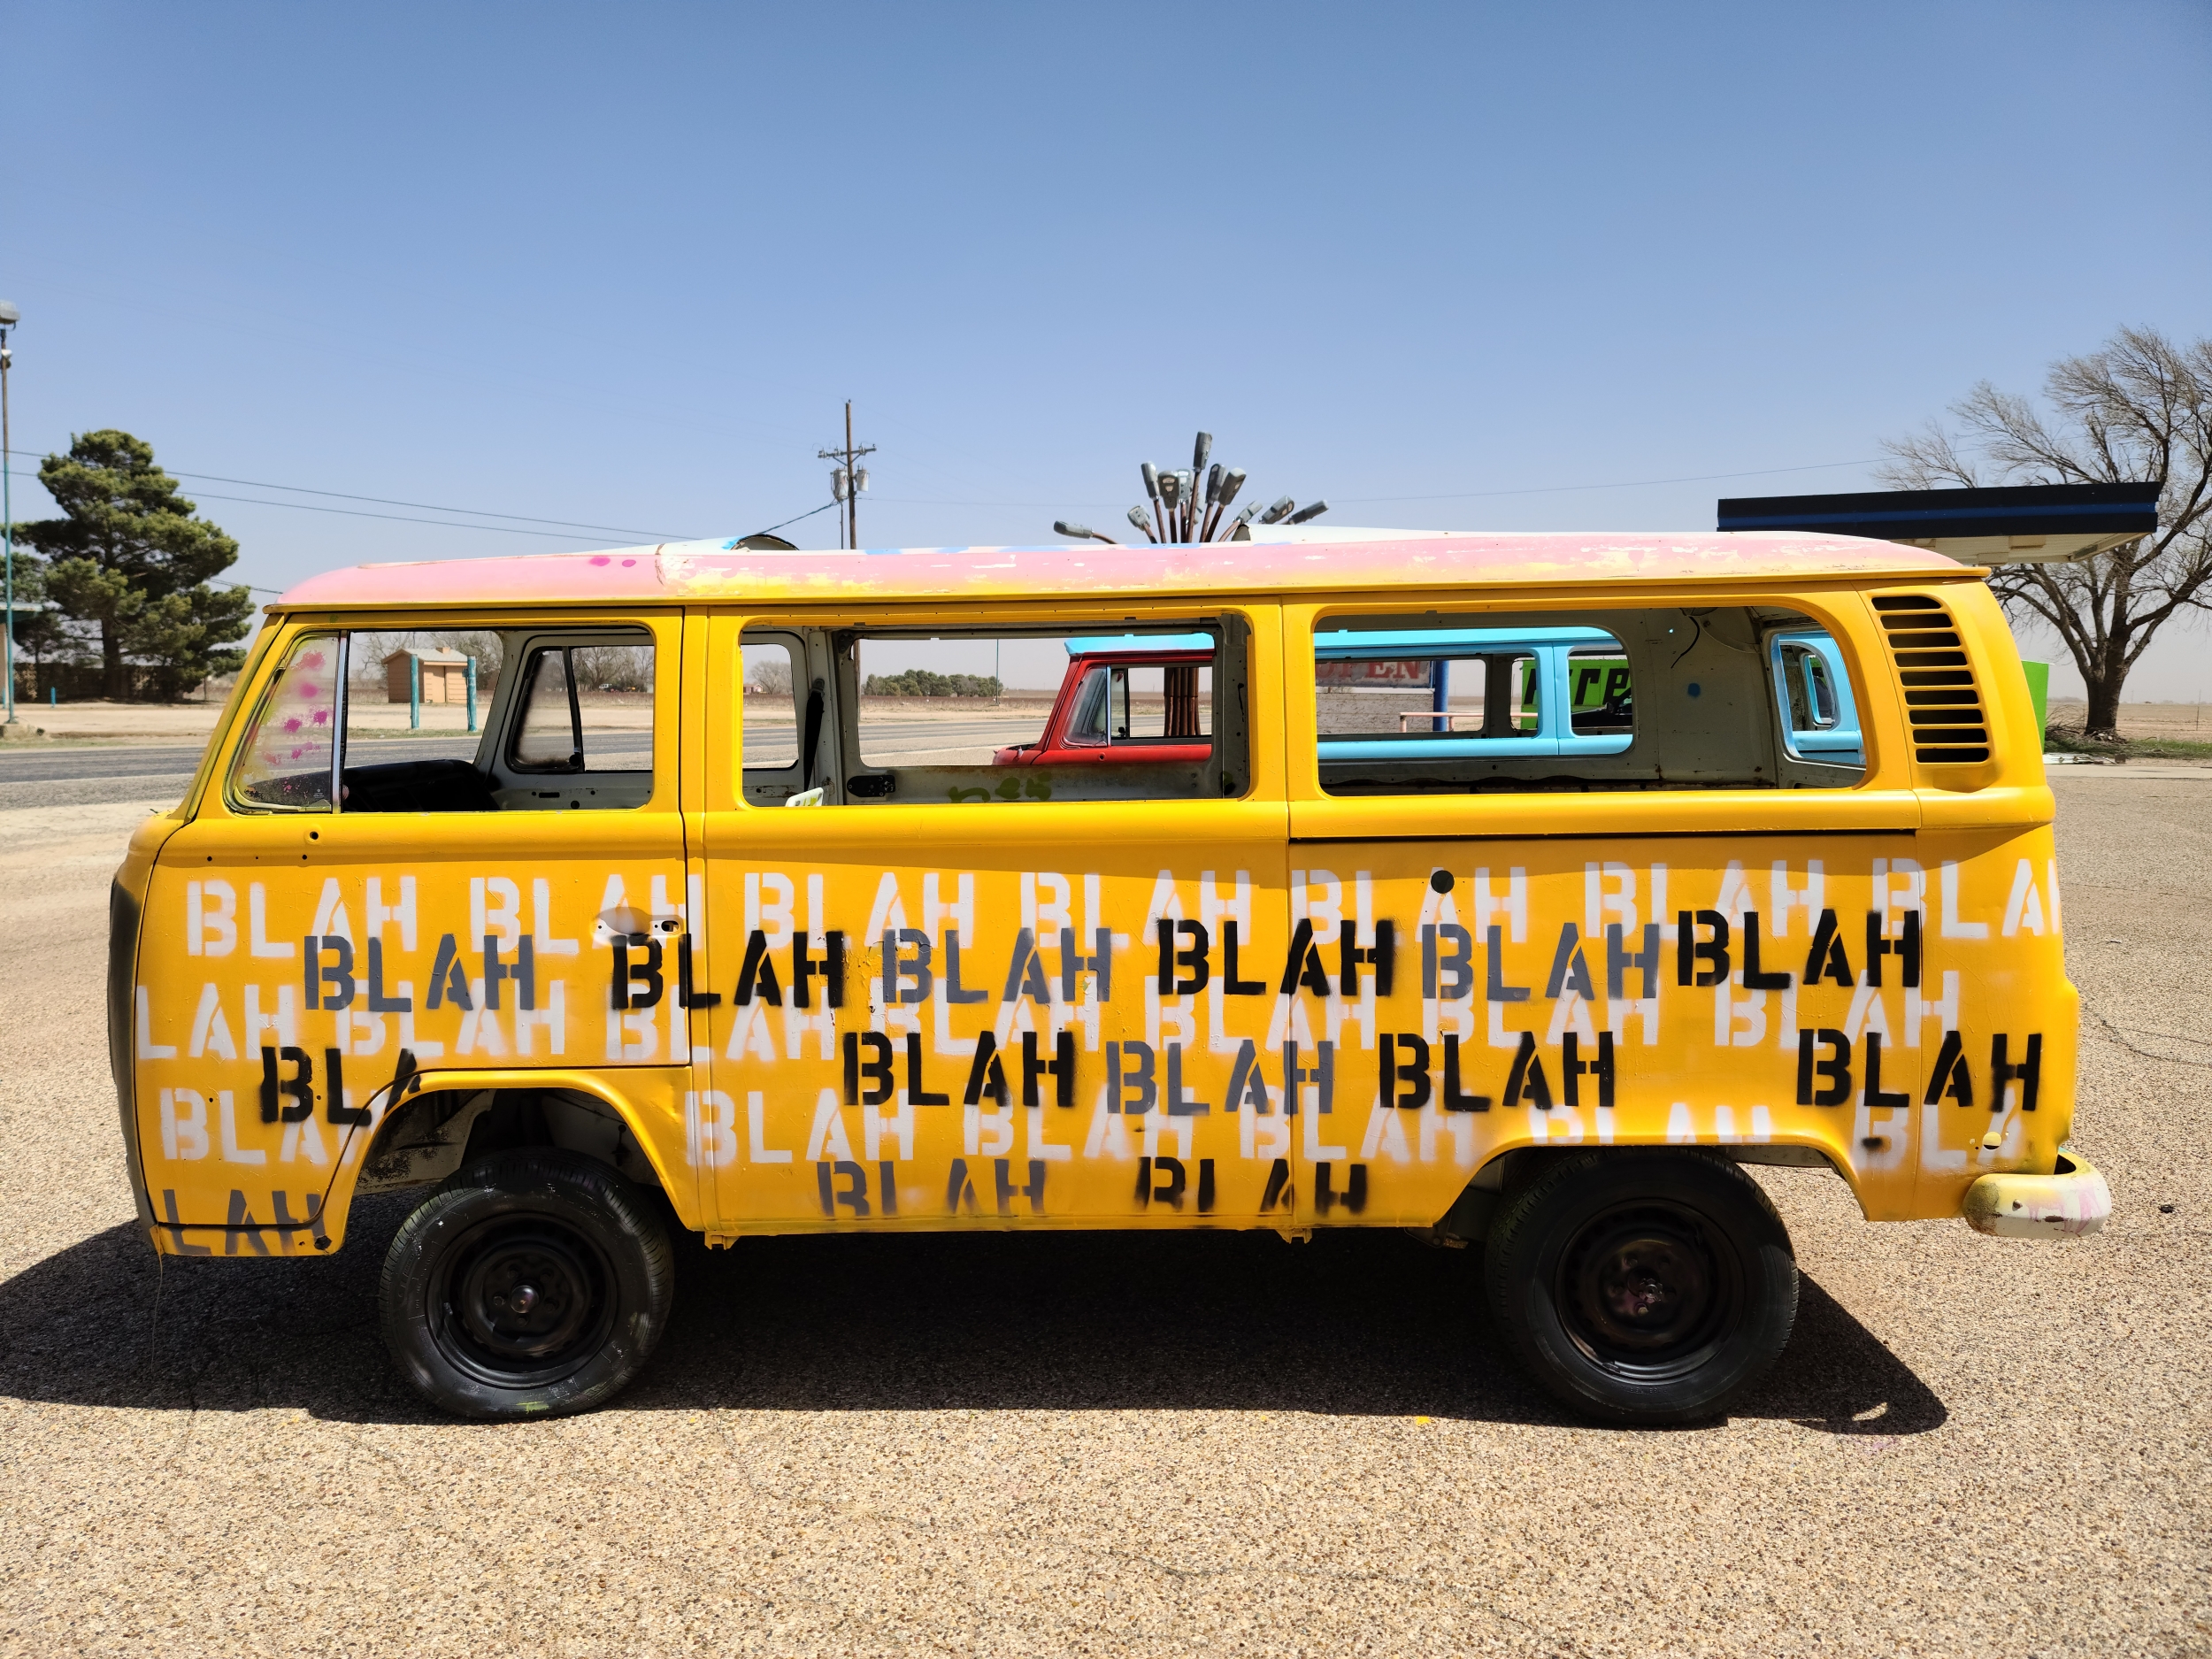 Yellow VW bus with the word "blah" written all over it